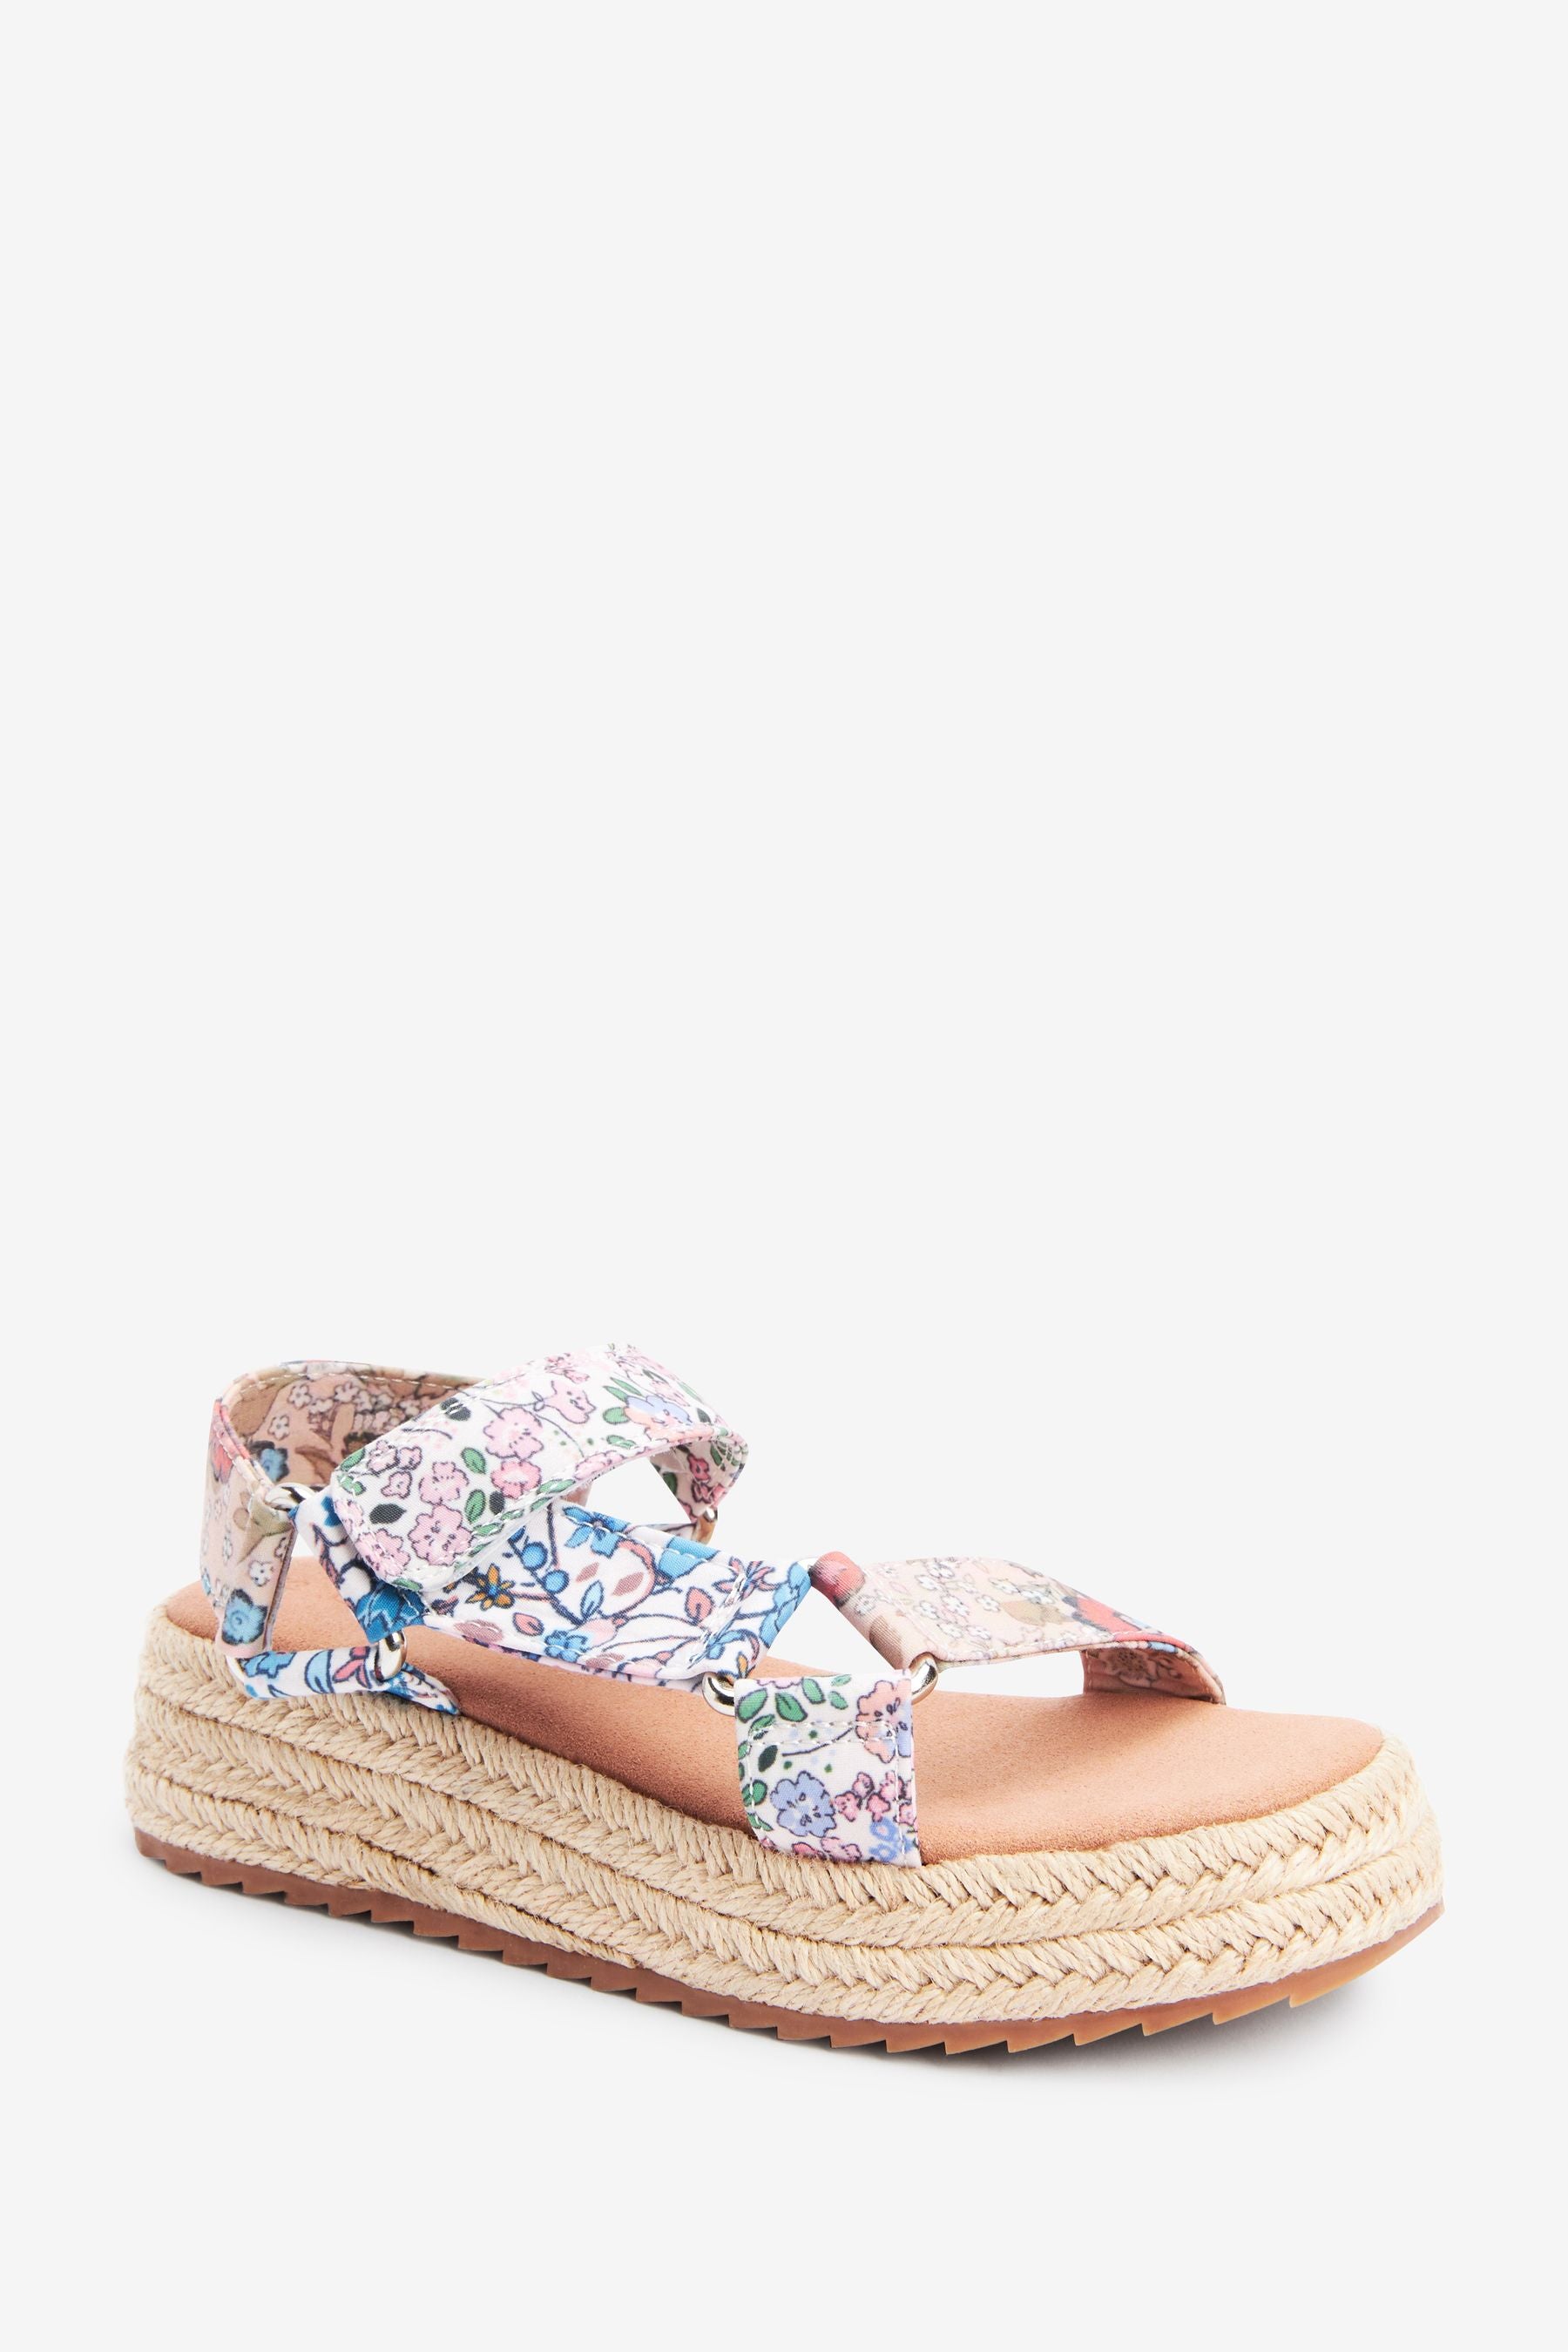 White Floral Patchwork Wedge Sandals